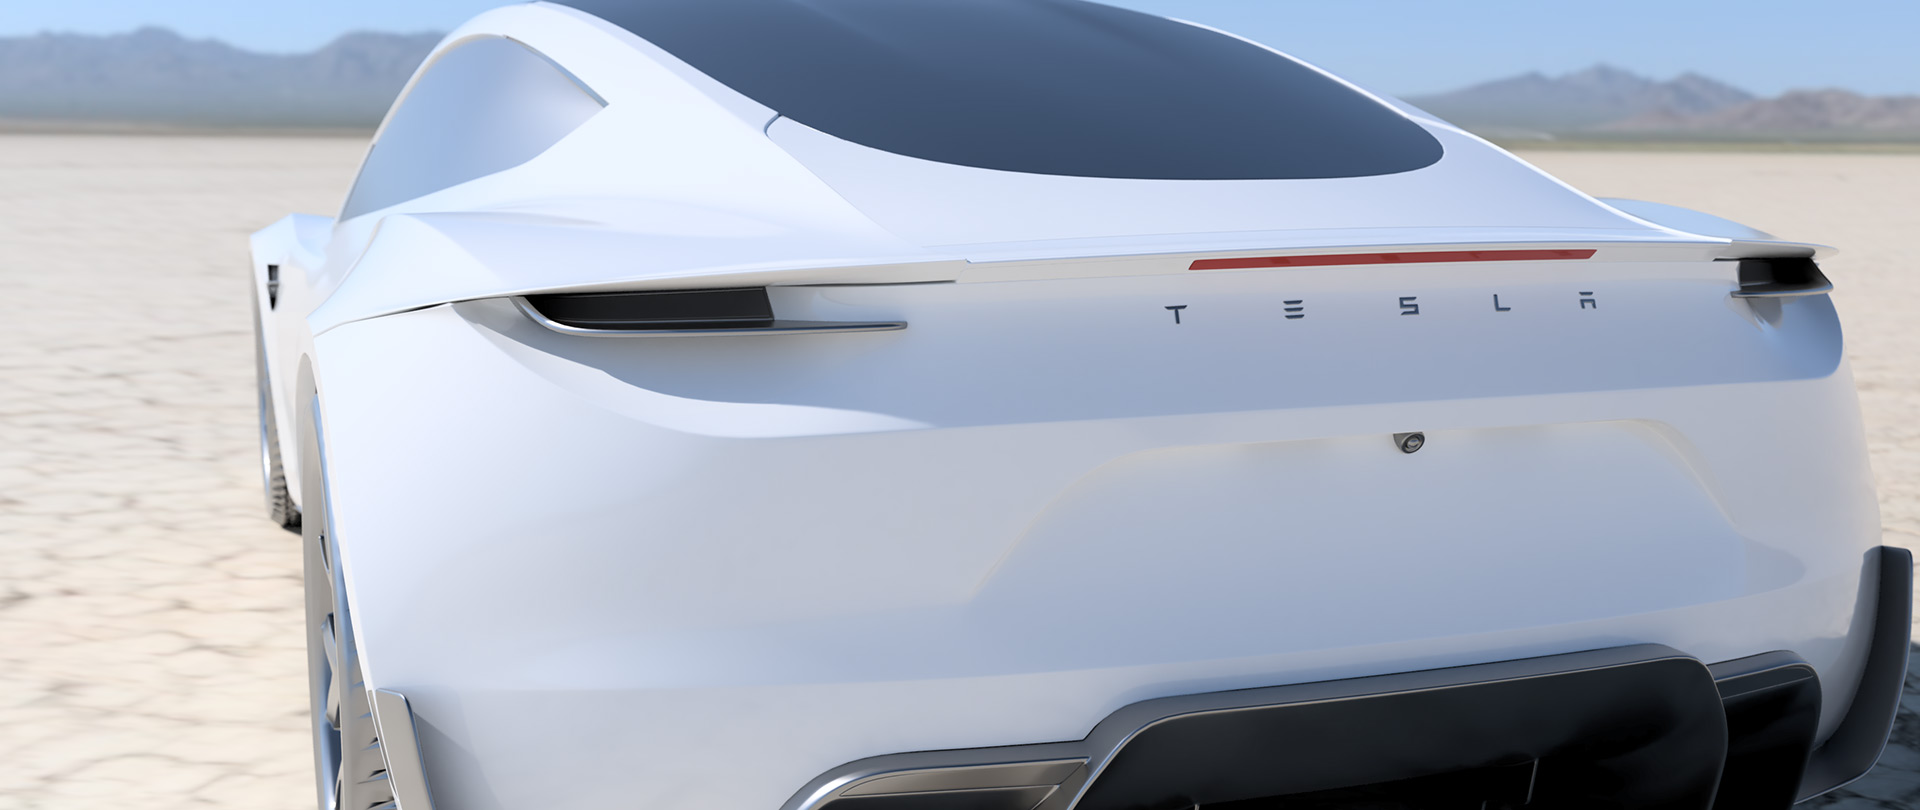 See Some Jaw Dropping Renders Of The 2020 Tesla Roadster In